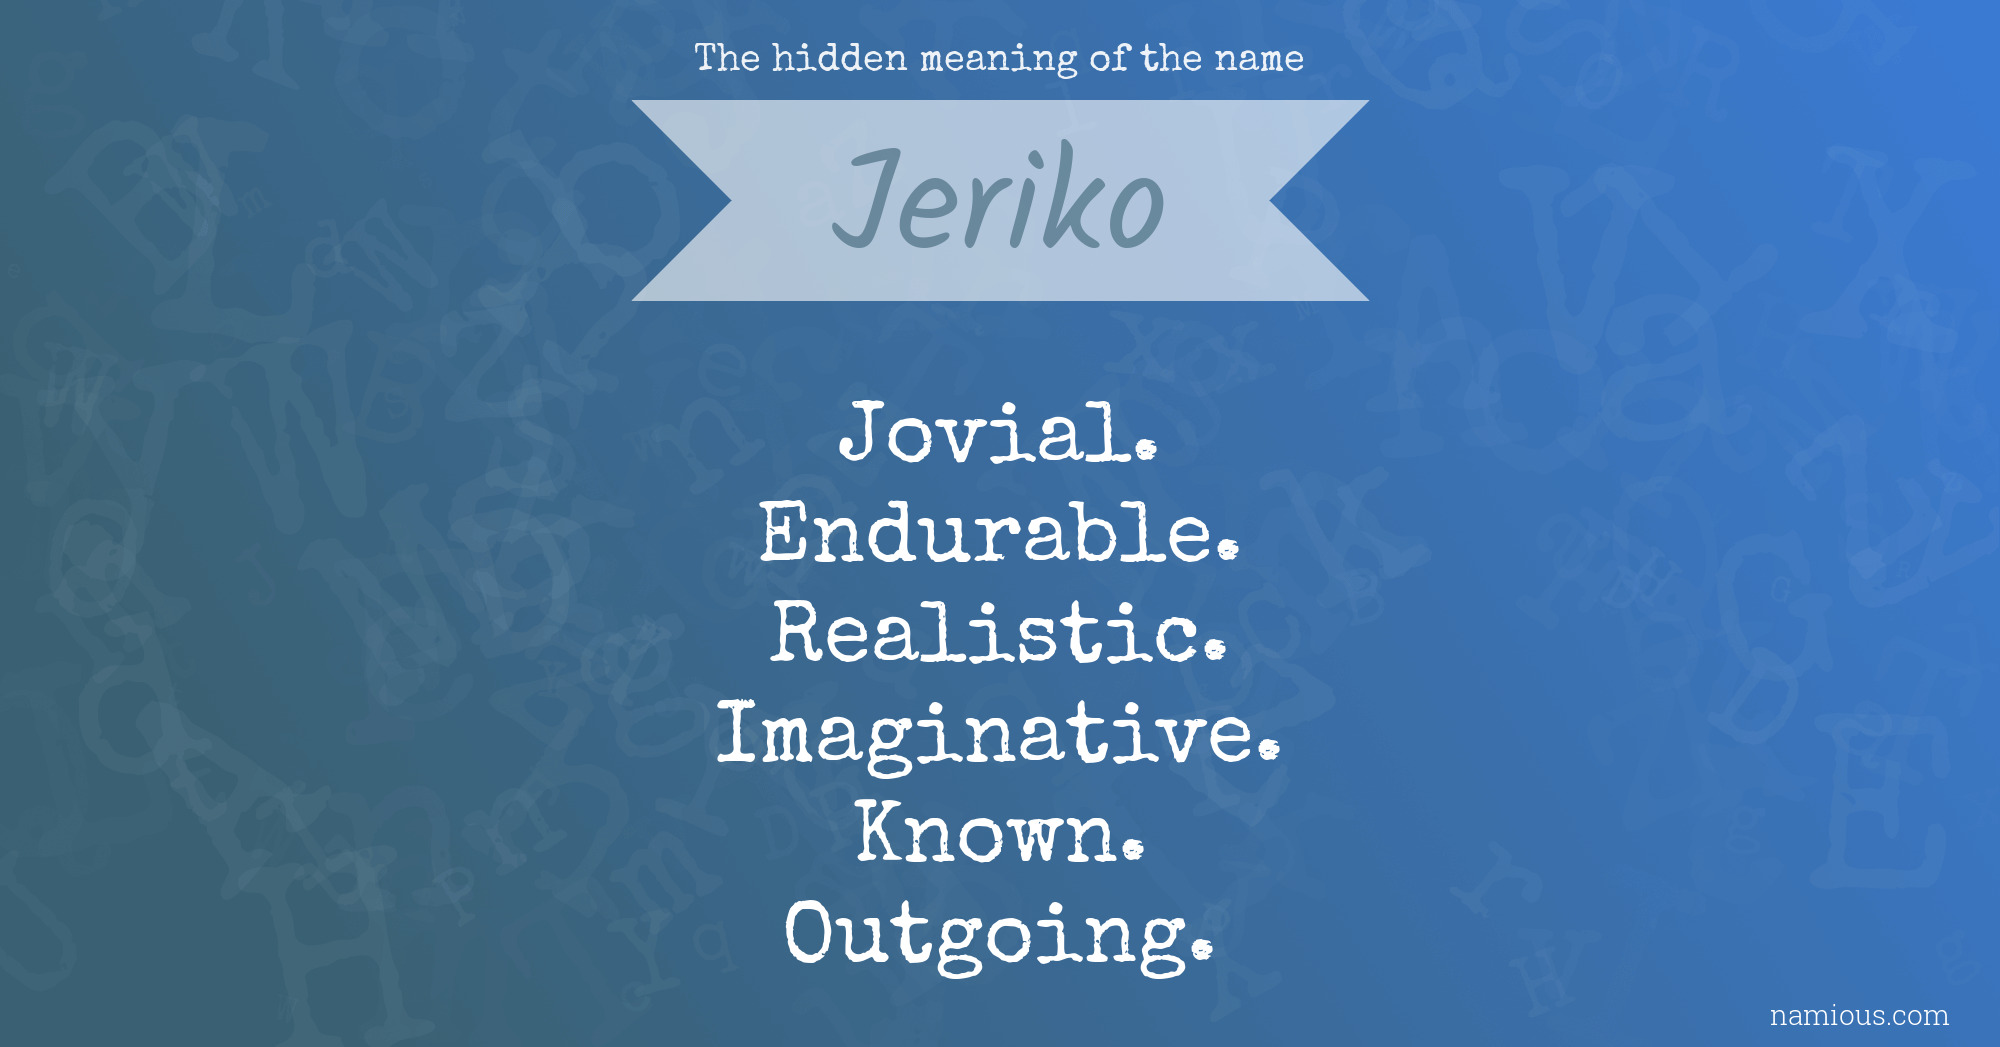 The hidden meaning of the name Jeriko